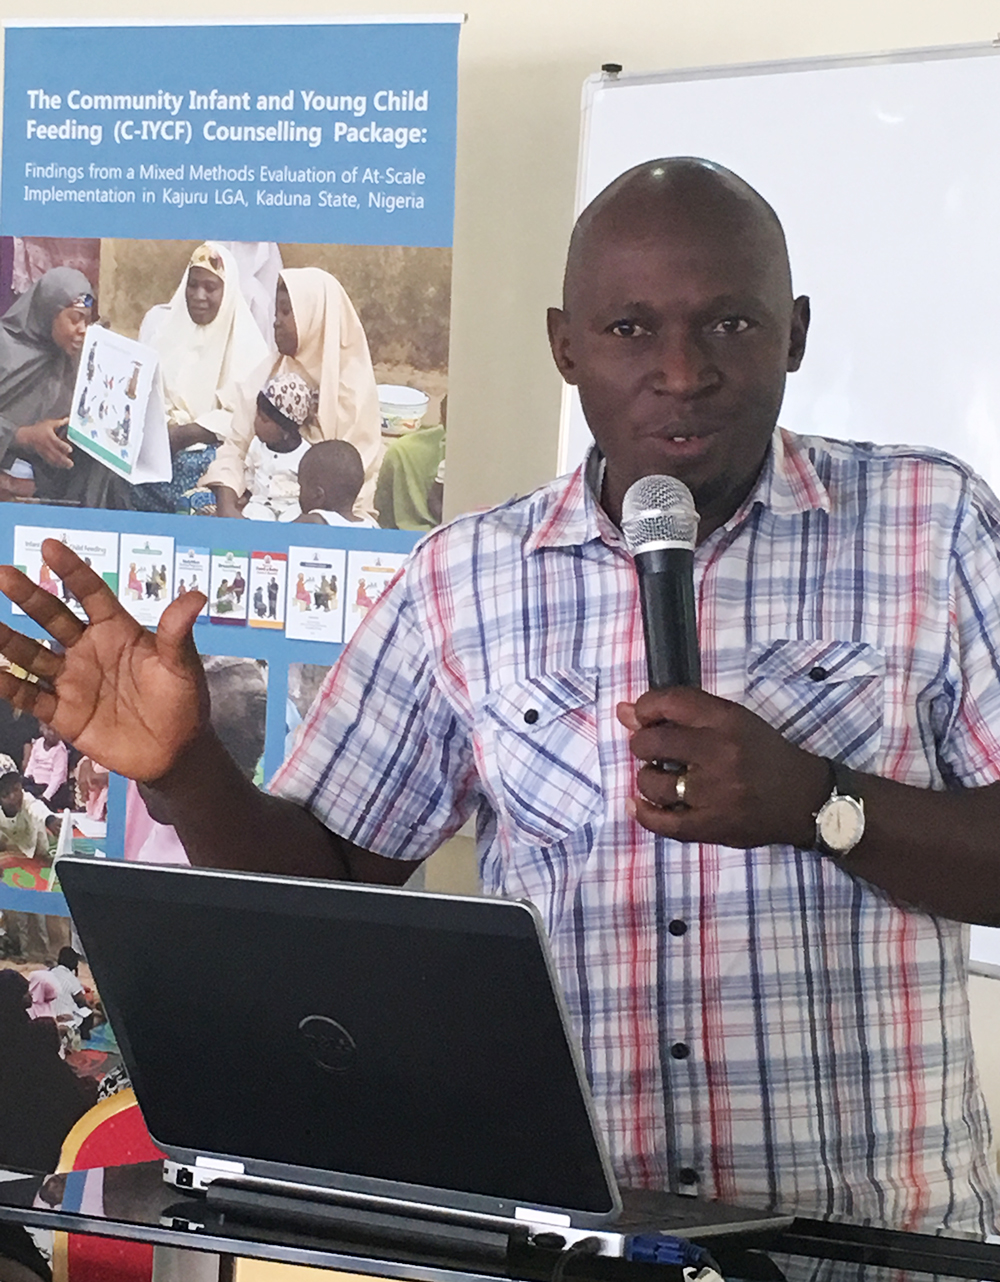 In Kaduna, Mr. Adams G. Ango, the Kajuru LGA Nutrition Focal Person, who worked closely with Ms. Adeyemi in overseeing implementation, took the lead on presenting implementation process, activities, and outputs. 